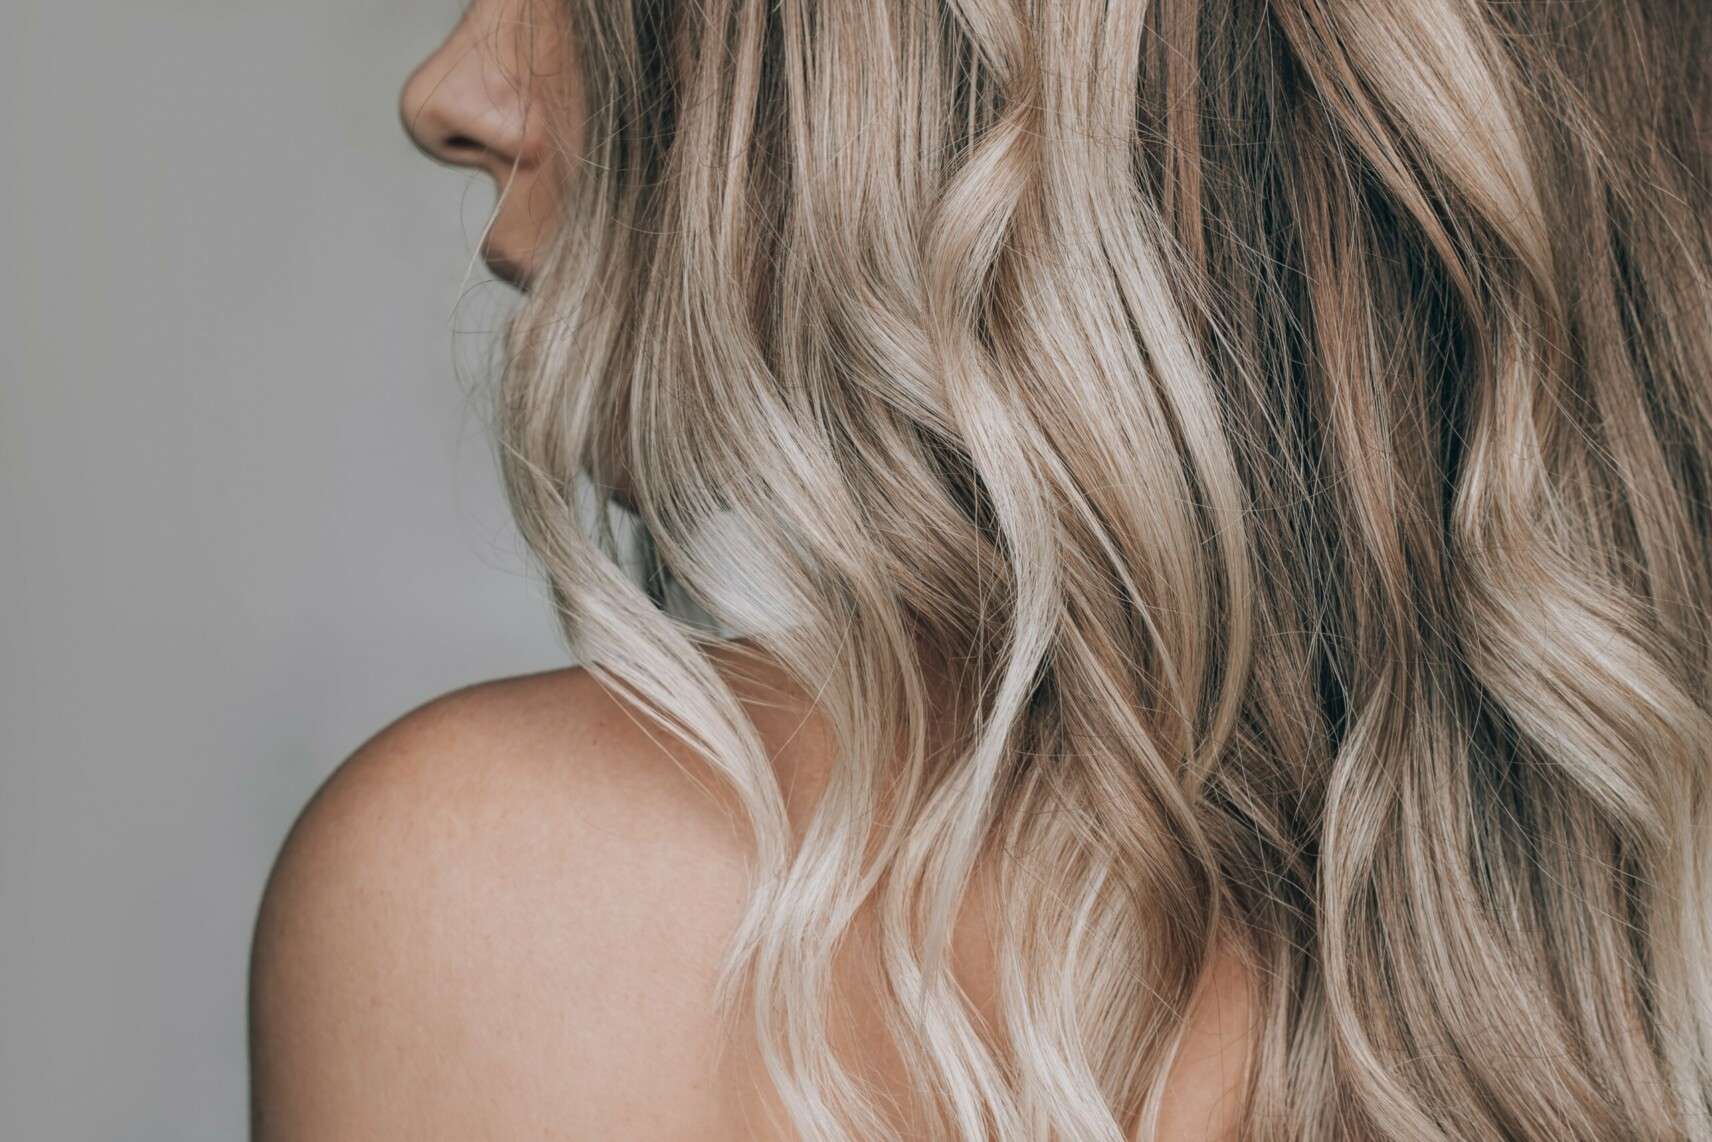 2. How to Achieve the Perfect Gray Blonde Hair Weave - wide 1